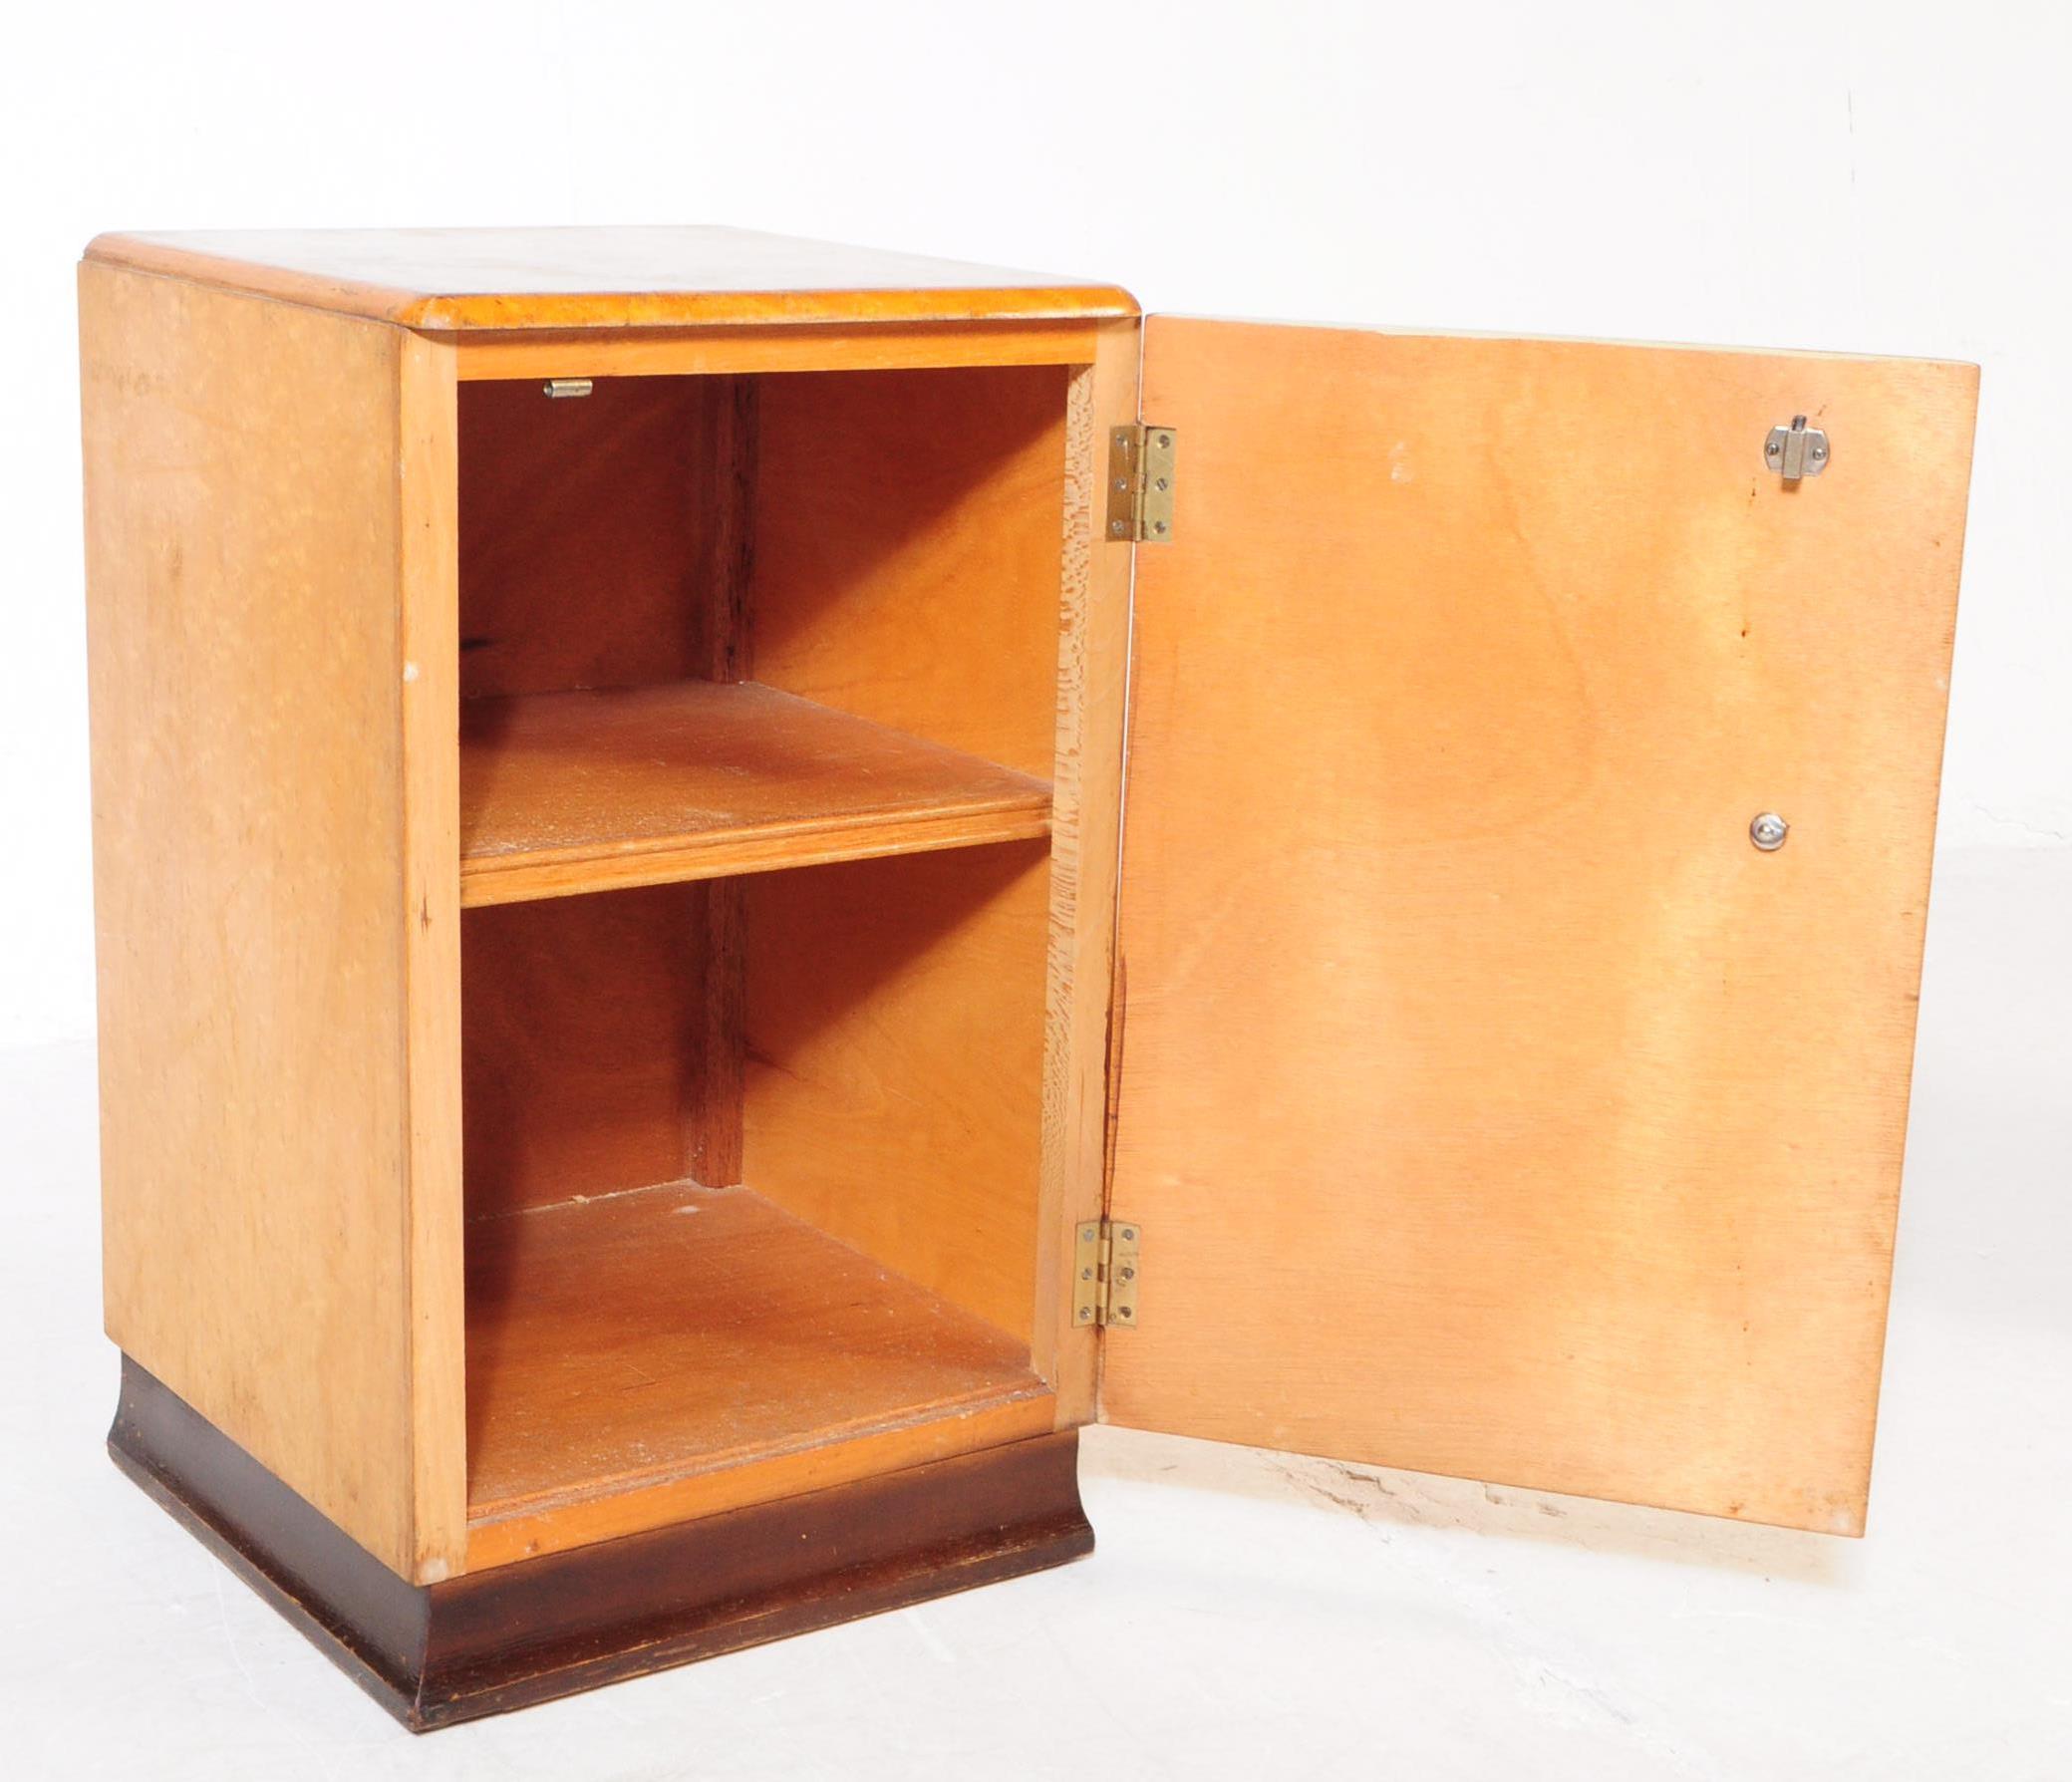 PAIR OF ART DECO BIRDSEYE MAPLE BEDSIDE CABINETS - Image 5 of 5